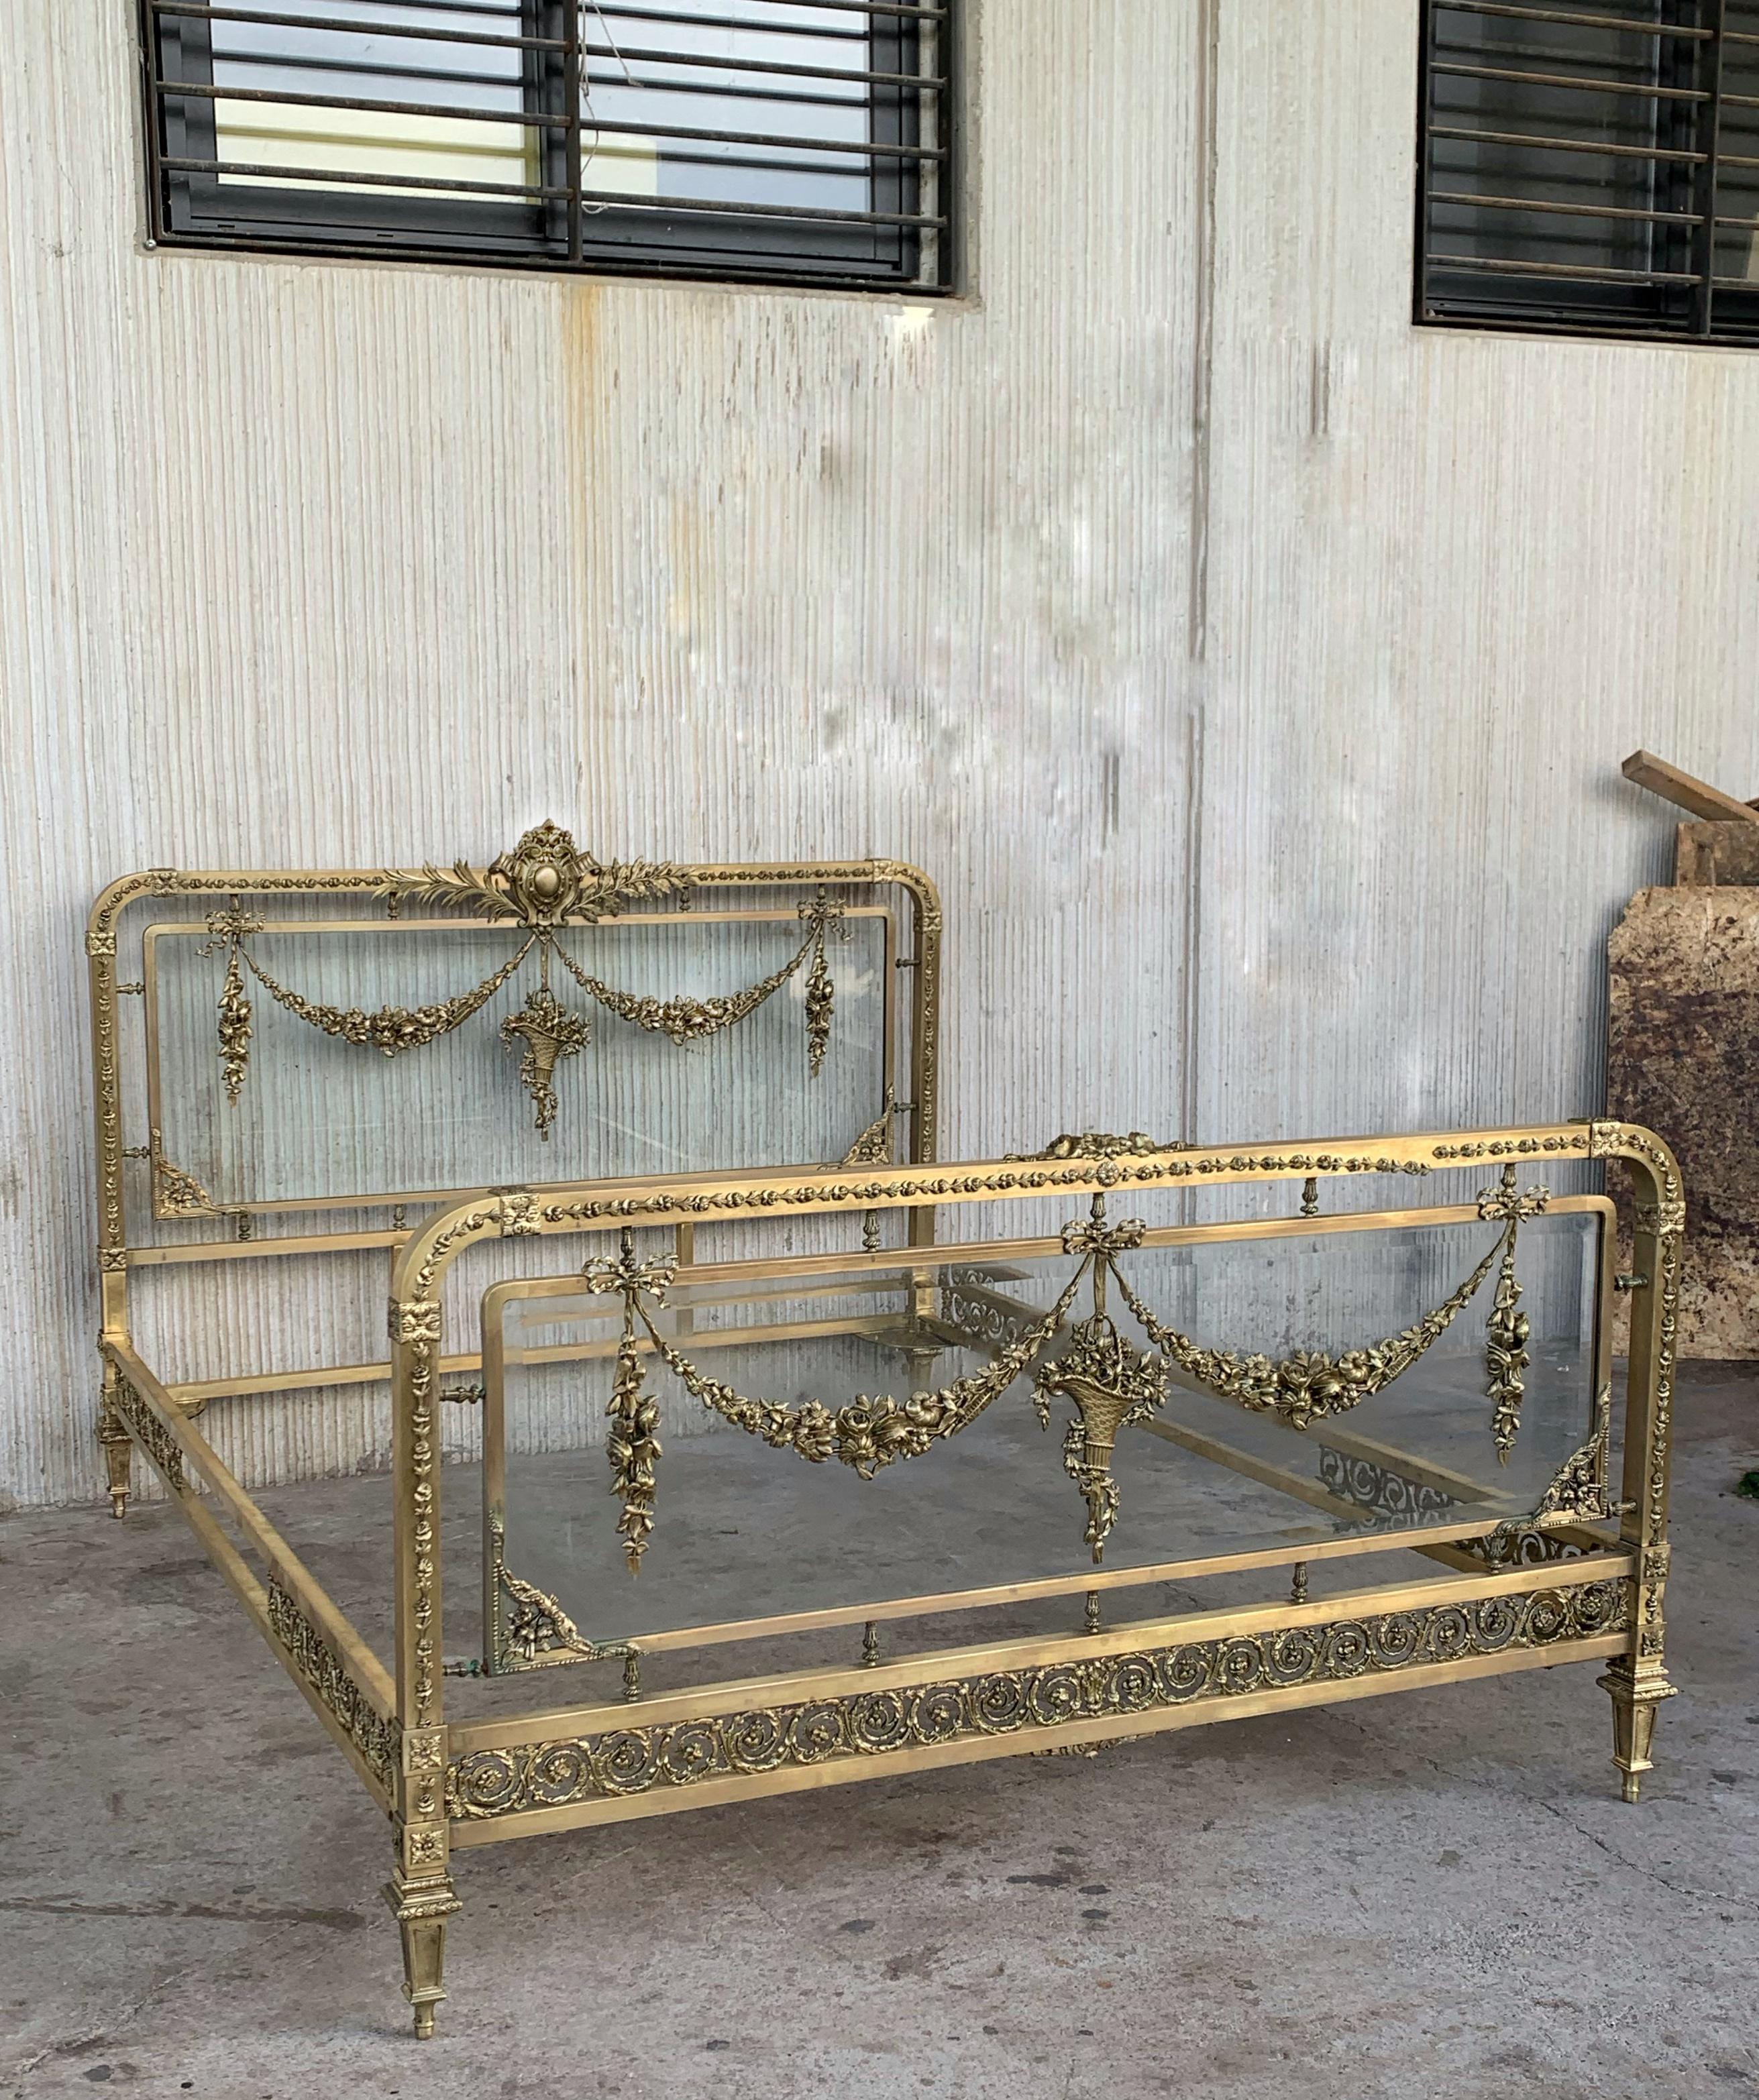 Beautiful and impressive 19th century full bed
French Belle Époque bronze, iron, brass and glass in the headboard and nightstands (not included in the listing)

You can change the bed slats for adapt it a queen bed.